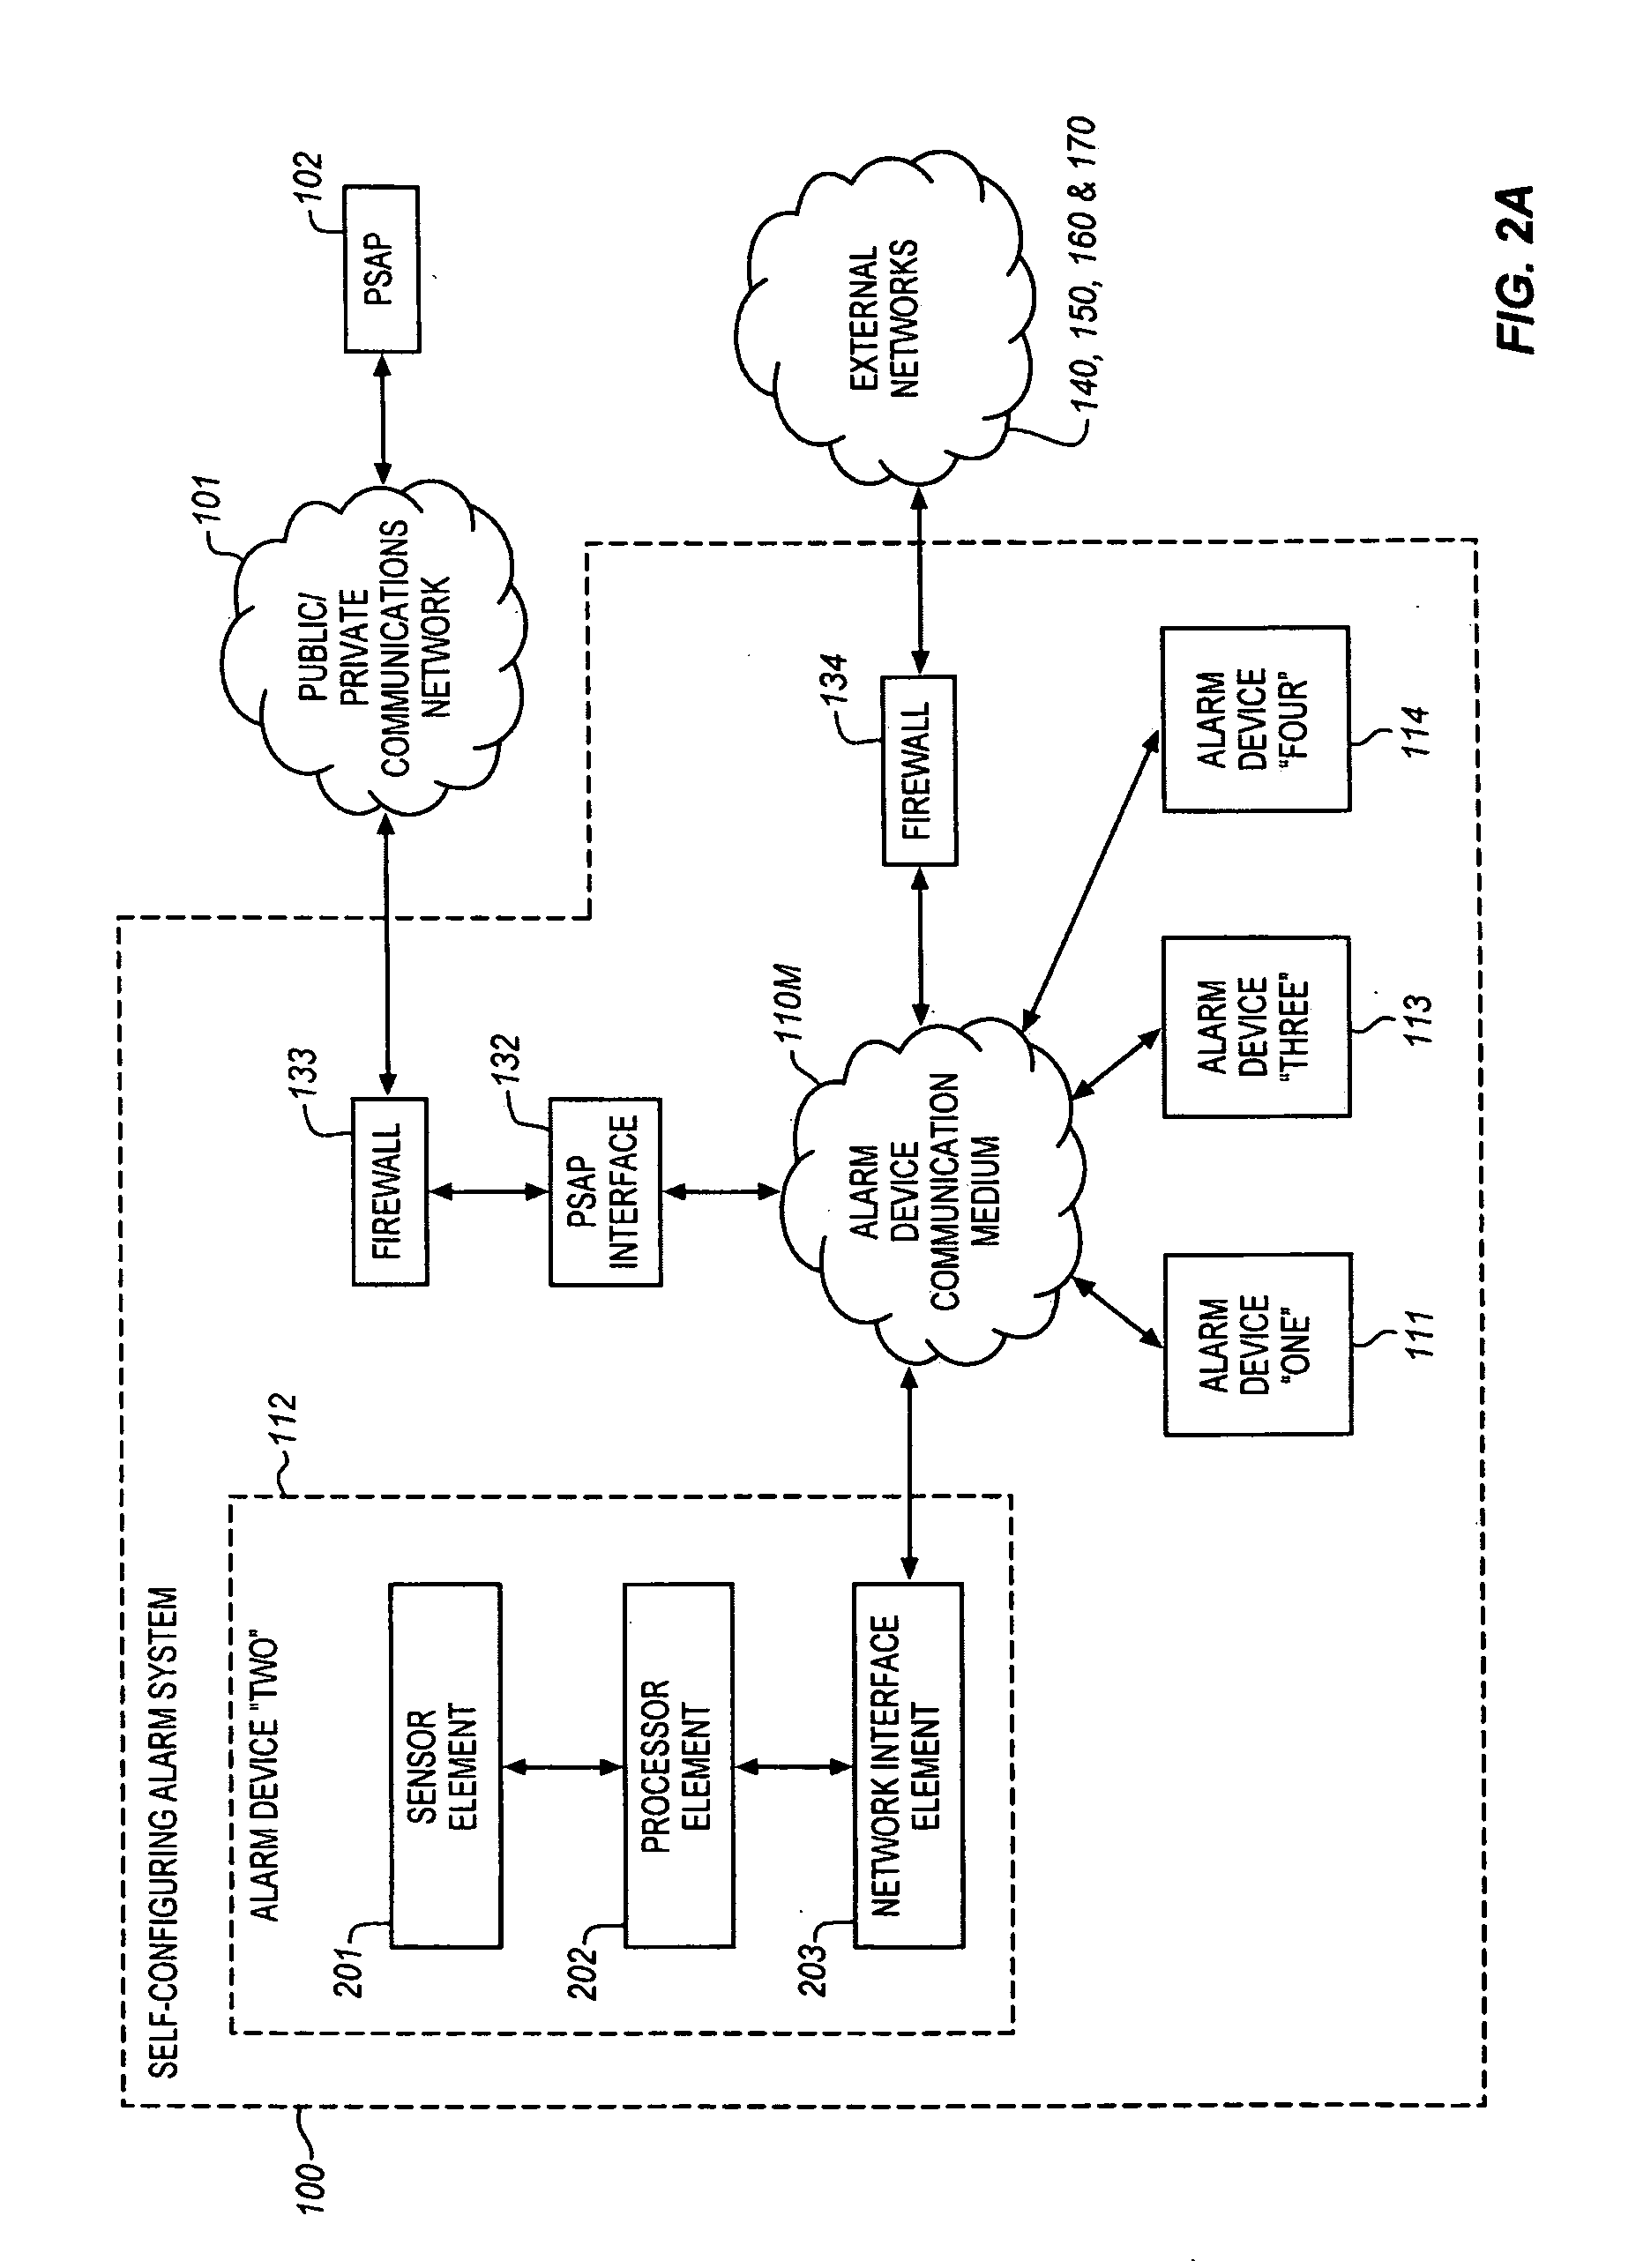 Self-configuring emergency event alarm system having connection to a public safety answering point